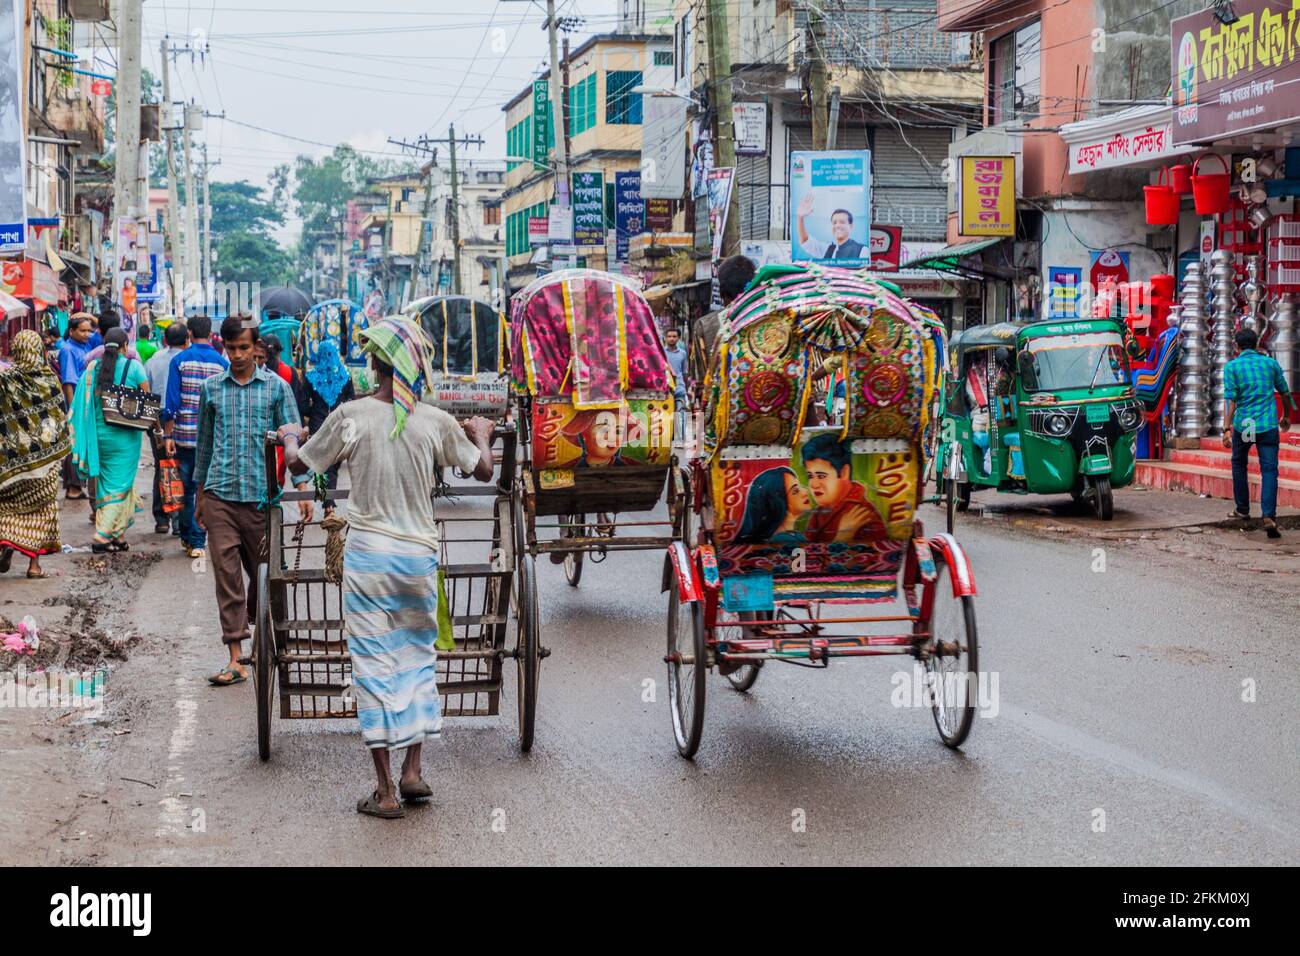 SRIMANGAL, BANGLADESH - NOVEMBER 5, 2016: View of the traffic on the main road in Srimangal. Stock Photo